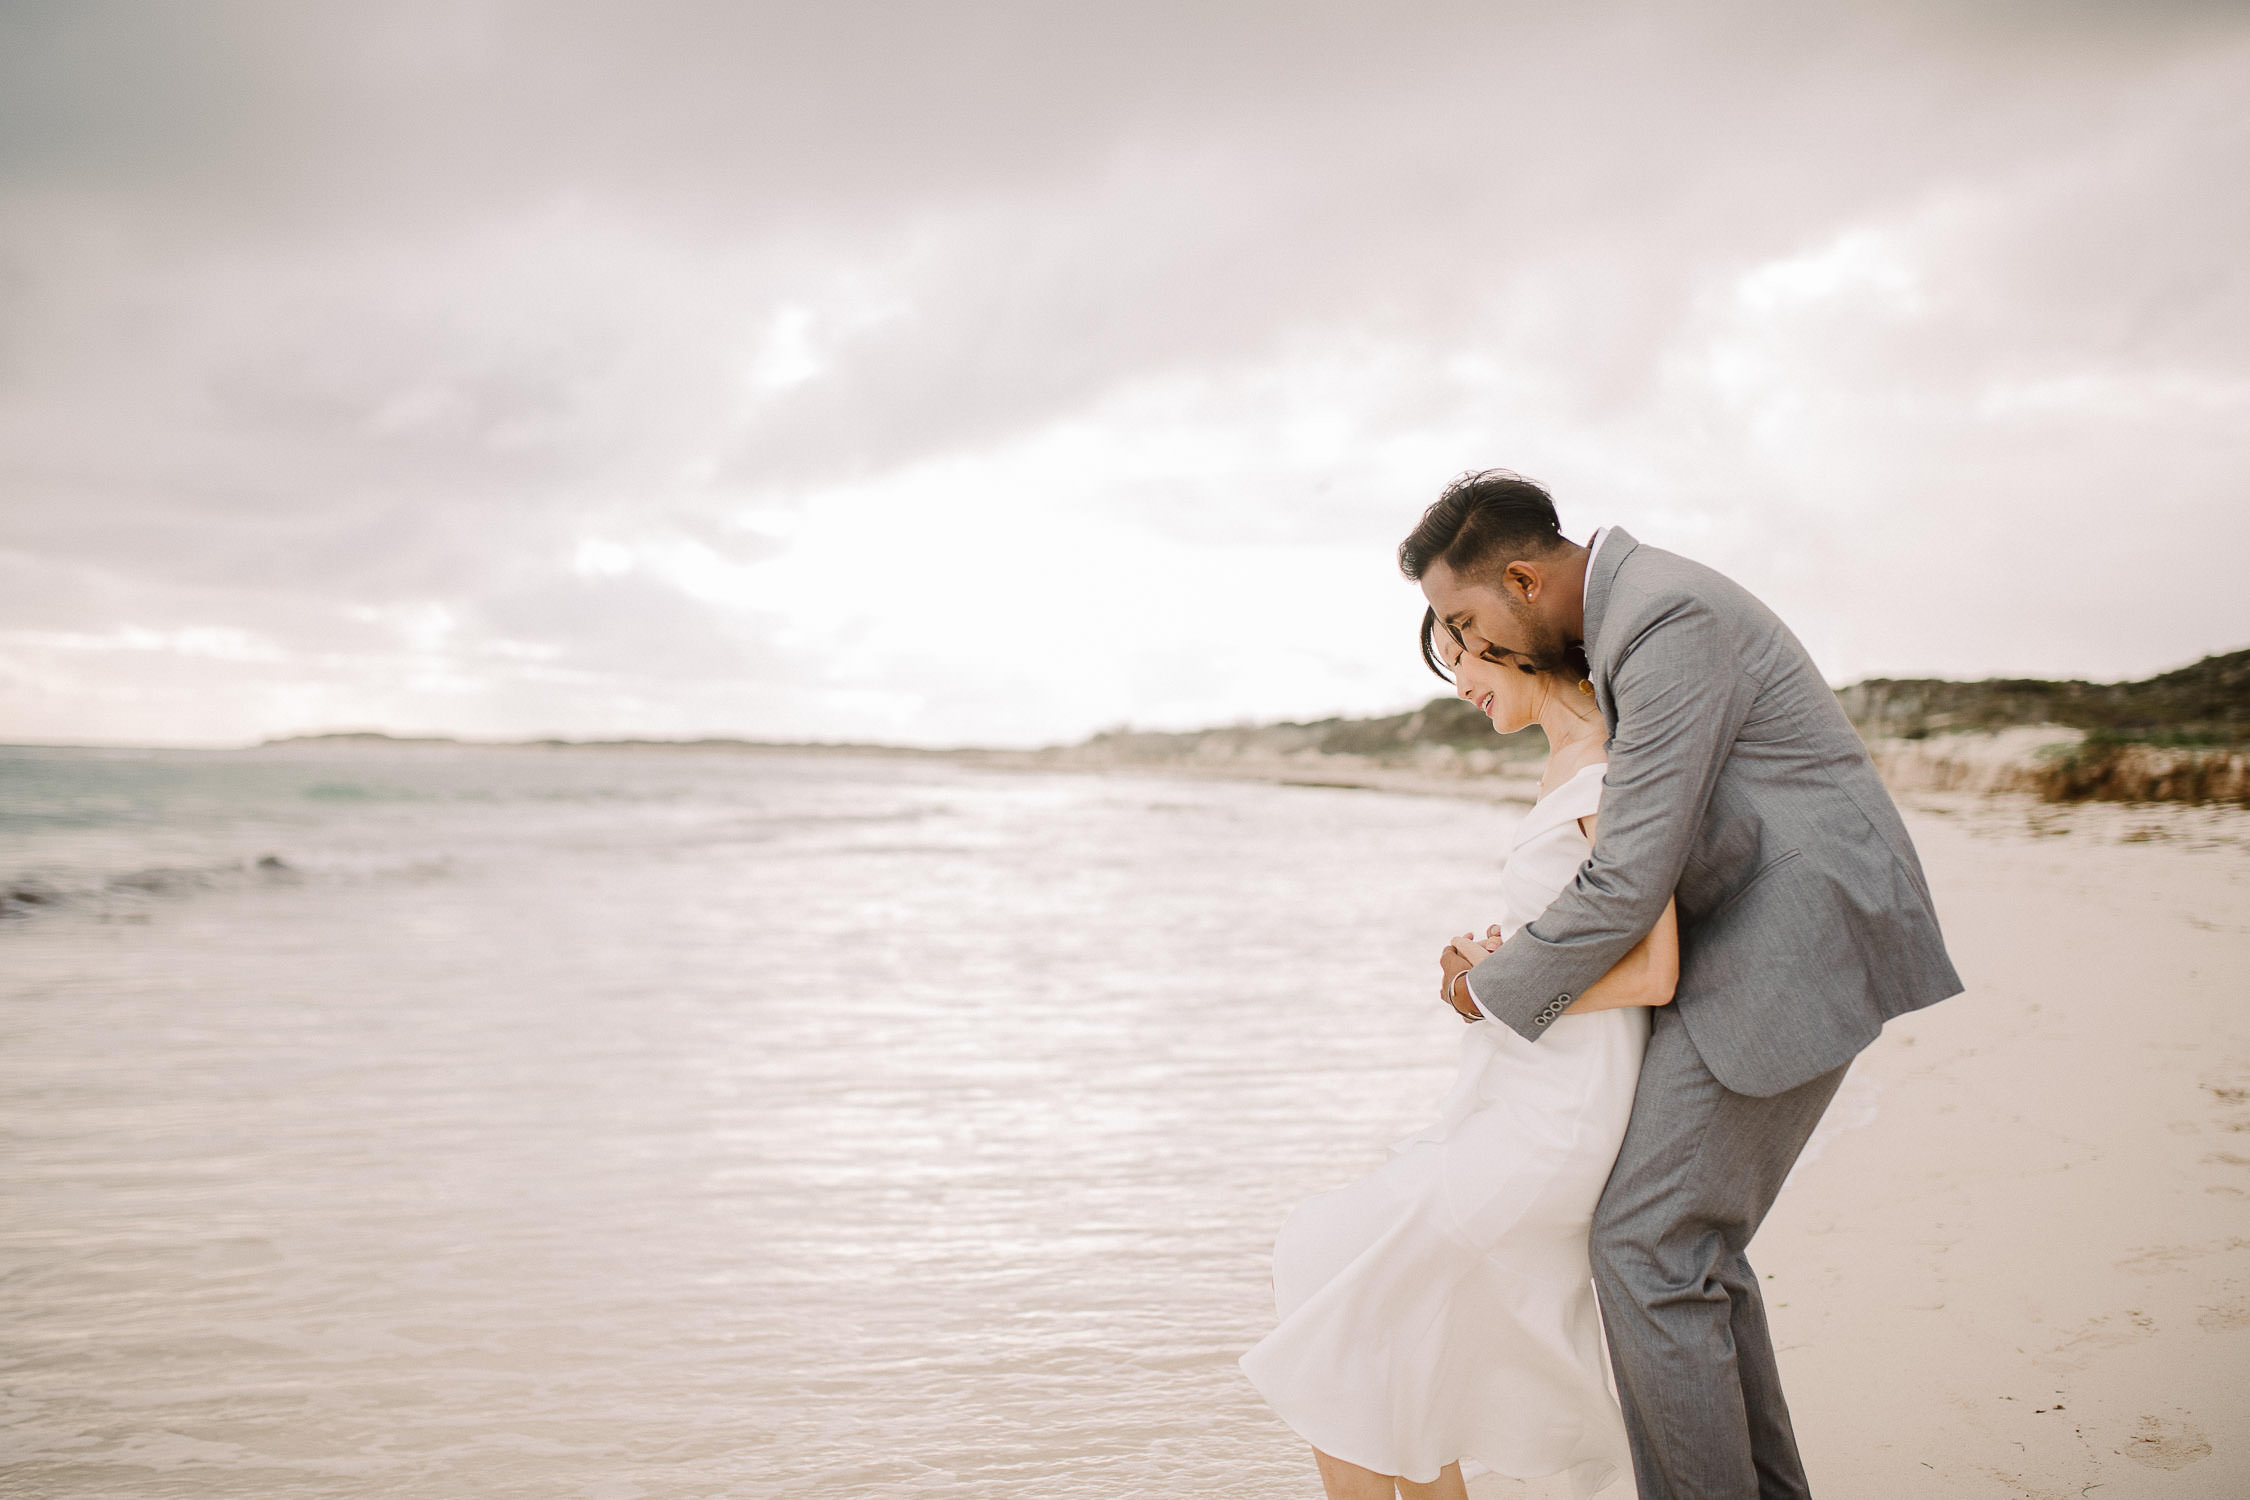 Perth pre-wedding at Lancelin sand dunes, Pinnacles Desert and forest by Naz on OneThreeOneFour 14